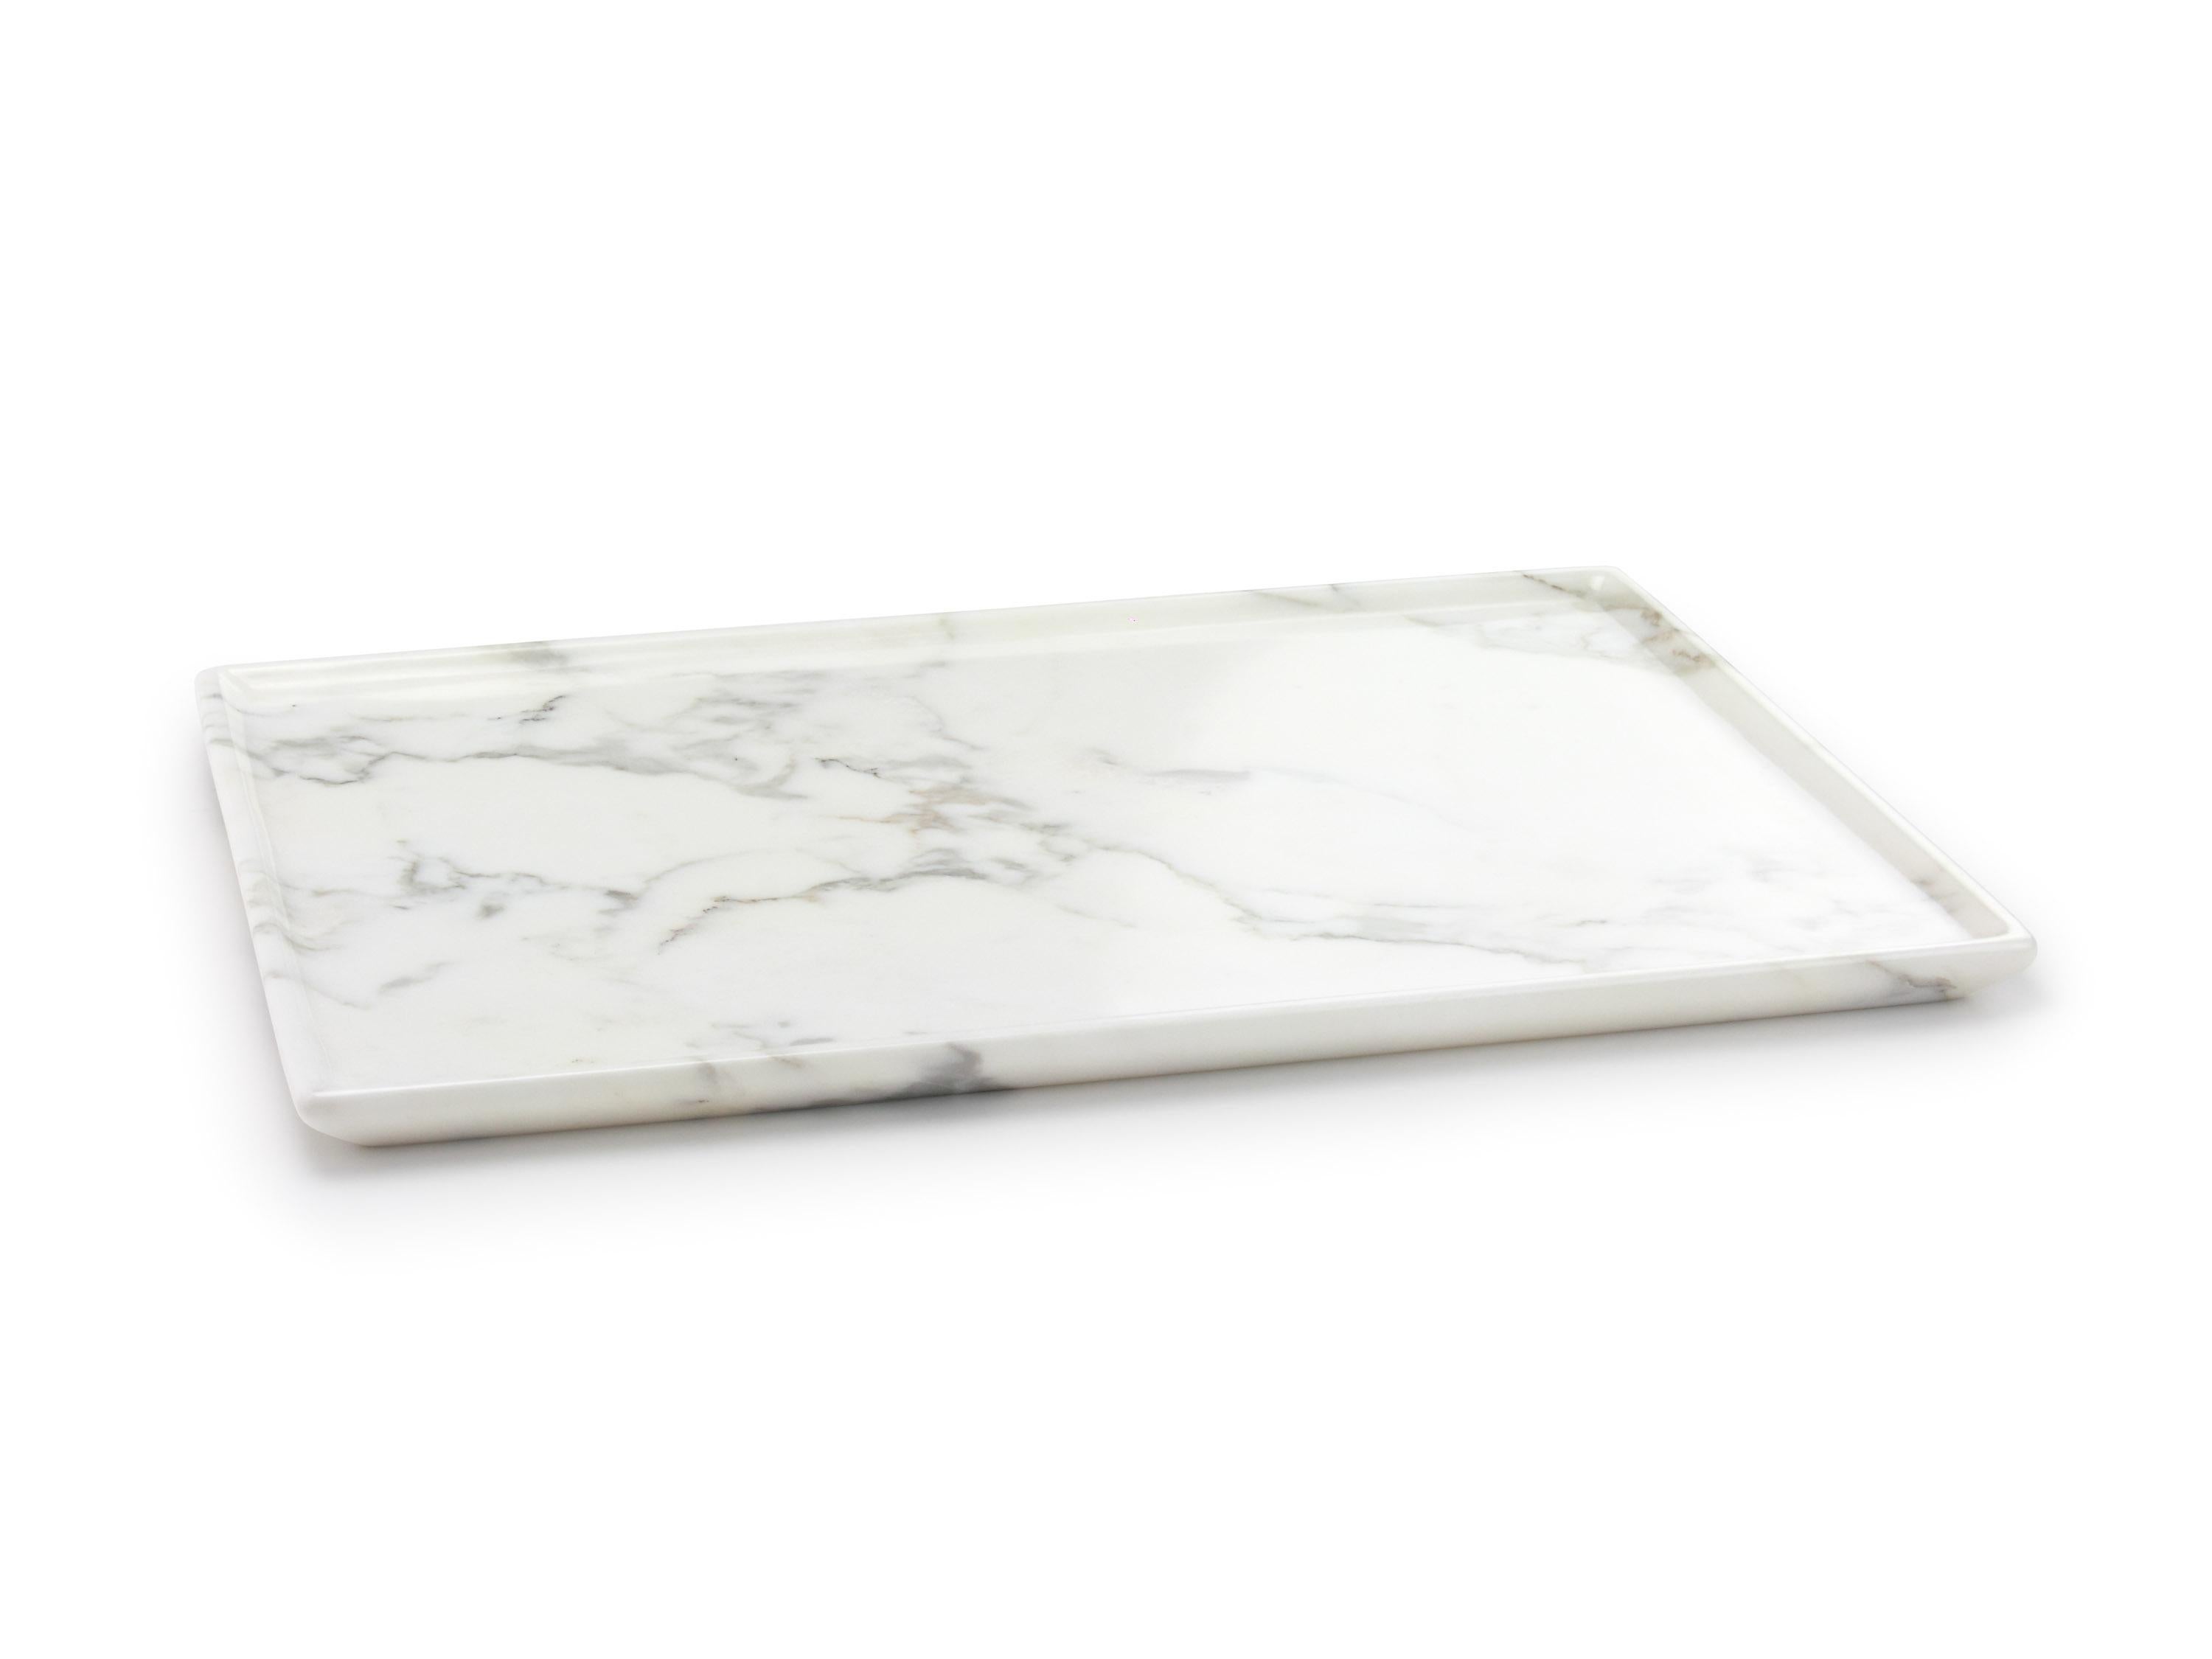 Tray or serving plates carved by hand from a solid block of white Calacatta marble. Tray dimensions: L 40, W 29.5, H 2 cm, available in different marbles and onyx.

Marble is a natural material, every piece is unique as each onyx block is